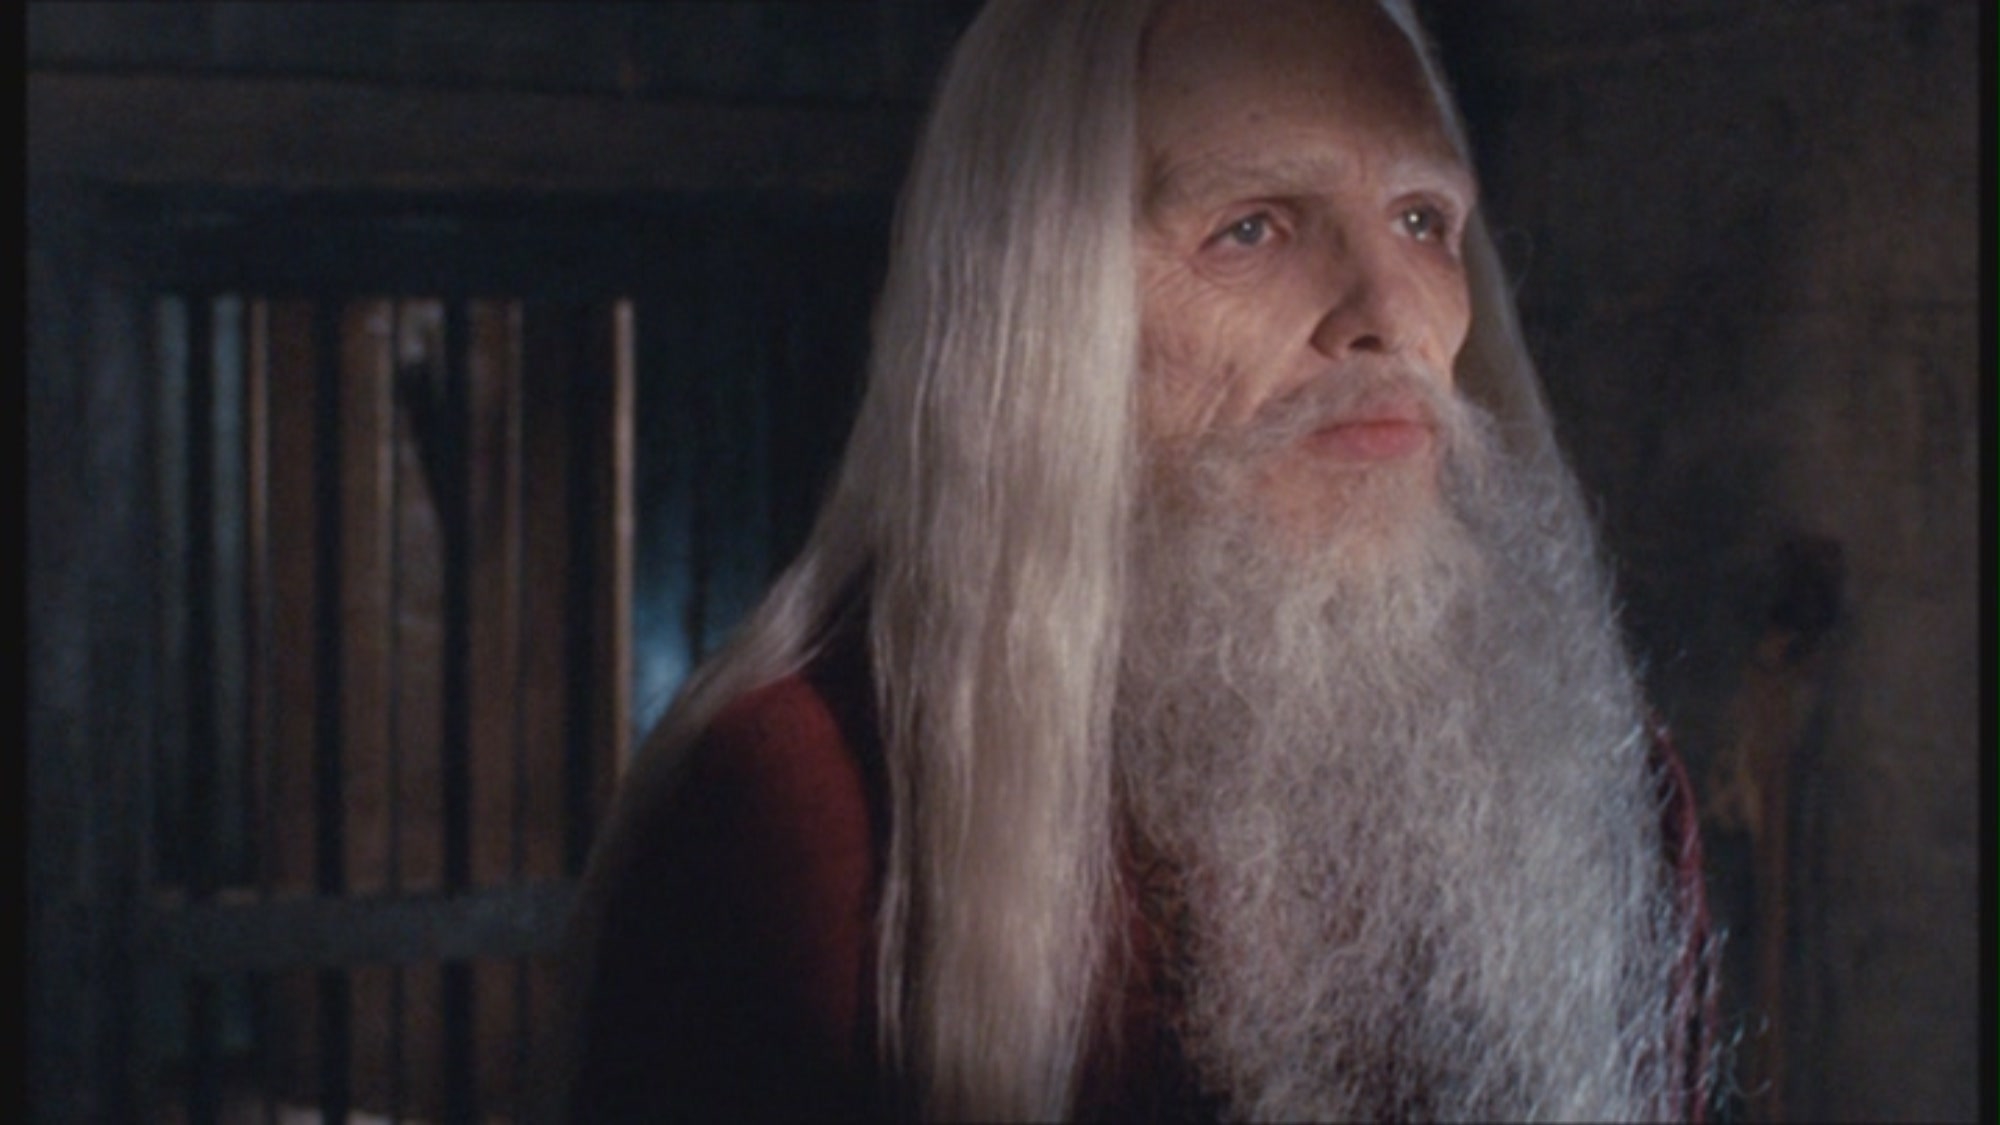 Character Gandalf from the Lord of the Rings series shown in a scene with a long white beard and robes